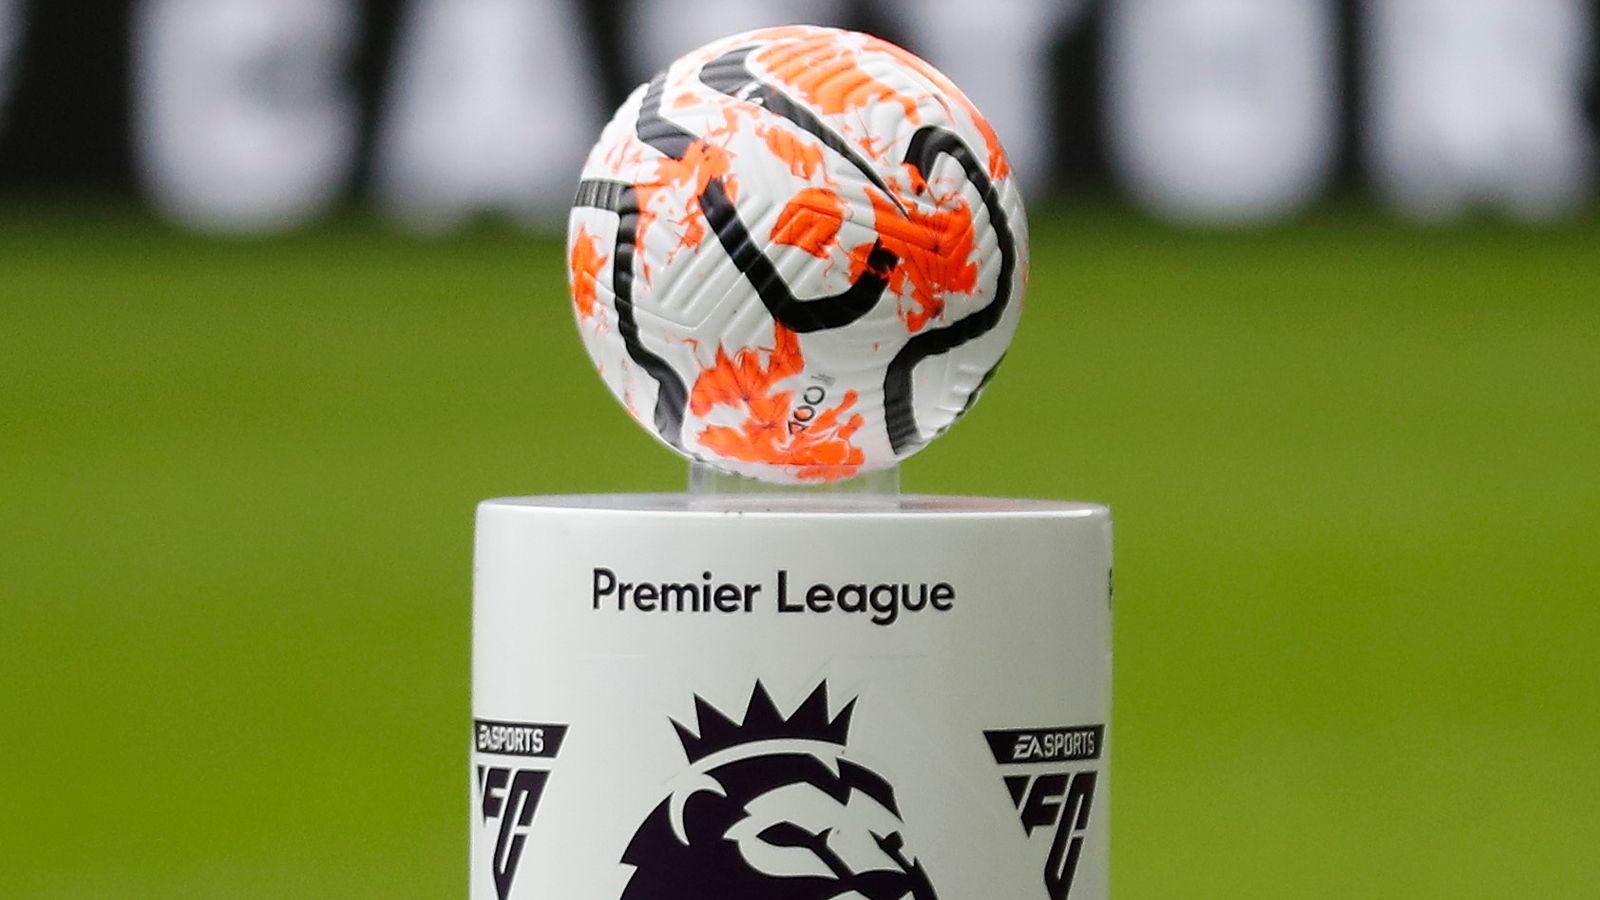 Premier League to Keep Profit and Sustainability Rules for Next Season Amid Vote Change Discussions.